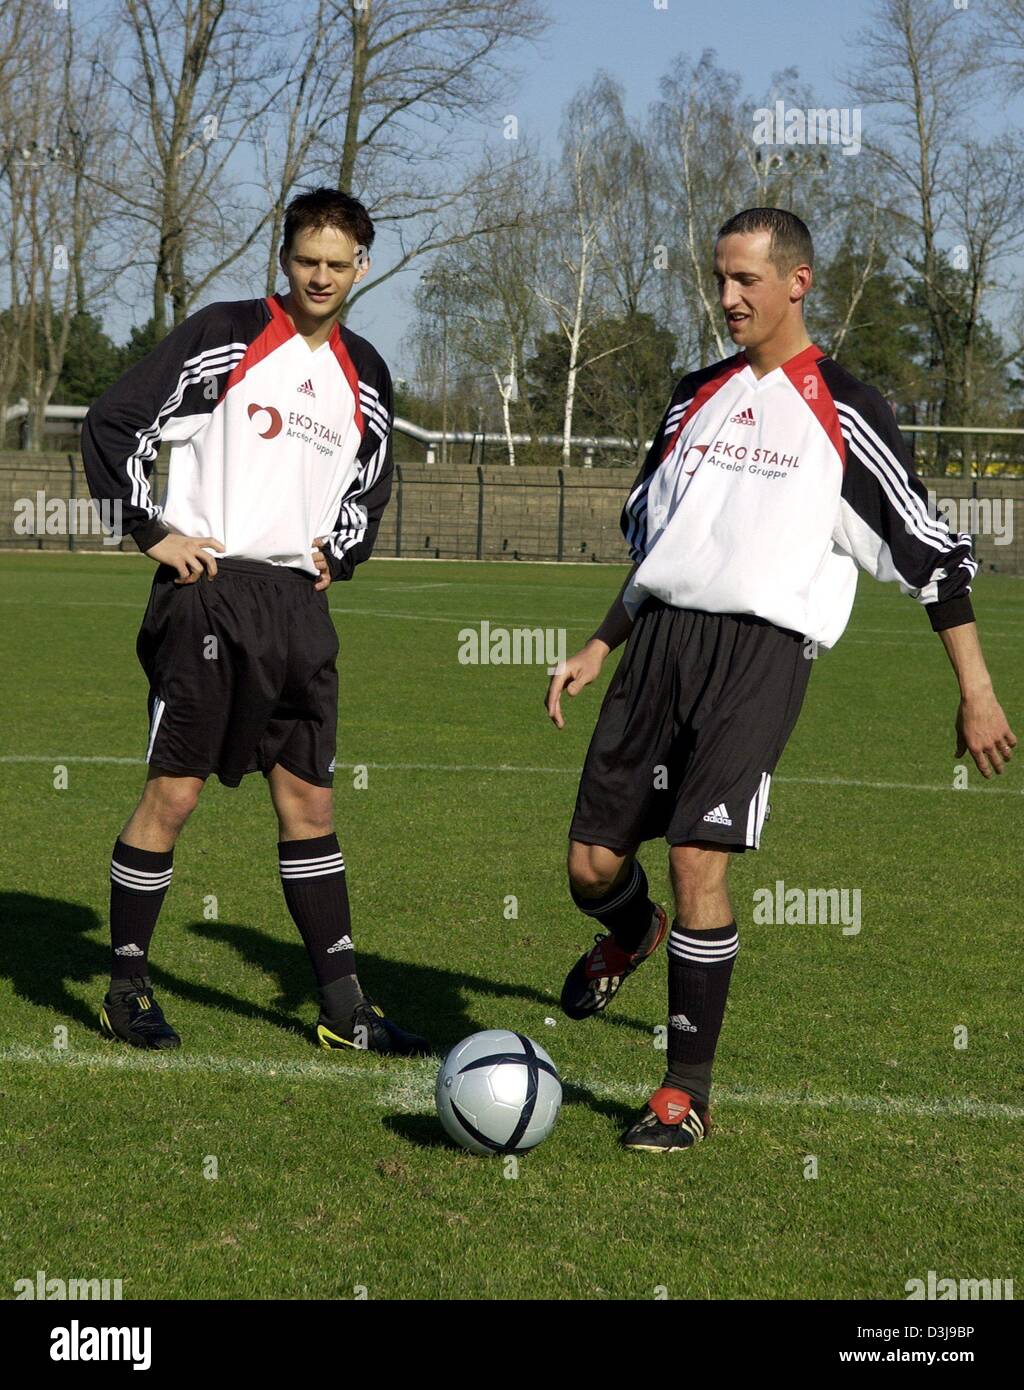 (dpa) - 23-year-old soccer player Normen Elsner (R) and his teammate Martin Greiner, who both play for Eisenhuettenstadt Stahl soccer club, during a training session in Eisenhuettenstadt, Germany, 14 April 2004. Forward Elsner became the centre of the news media after scoring a goal after only 3,52 seconds into a game in Germany's 4th division versus Victoria Frankfurt/Oder. Right  Stock Photo